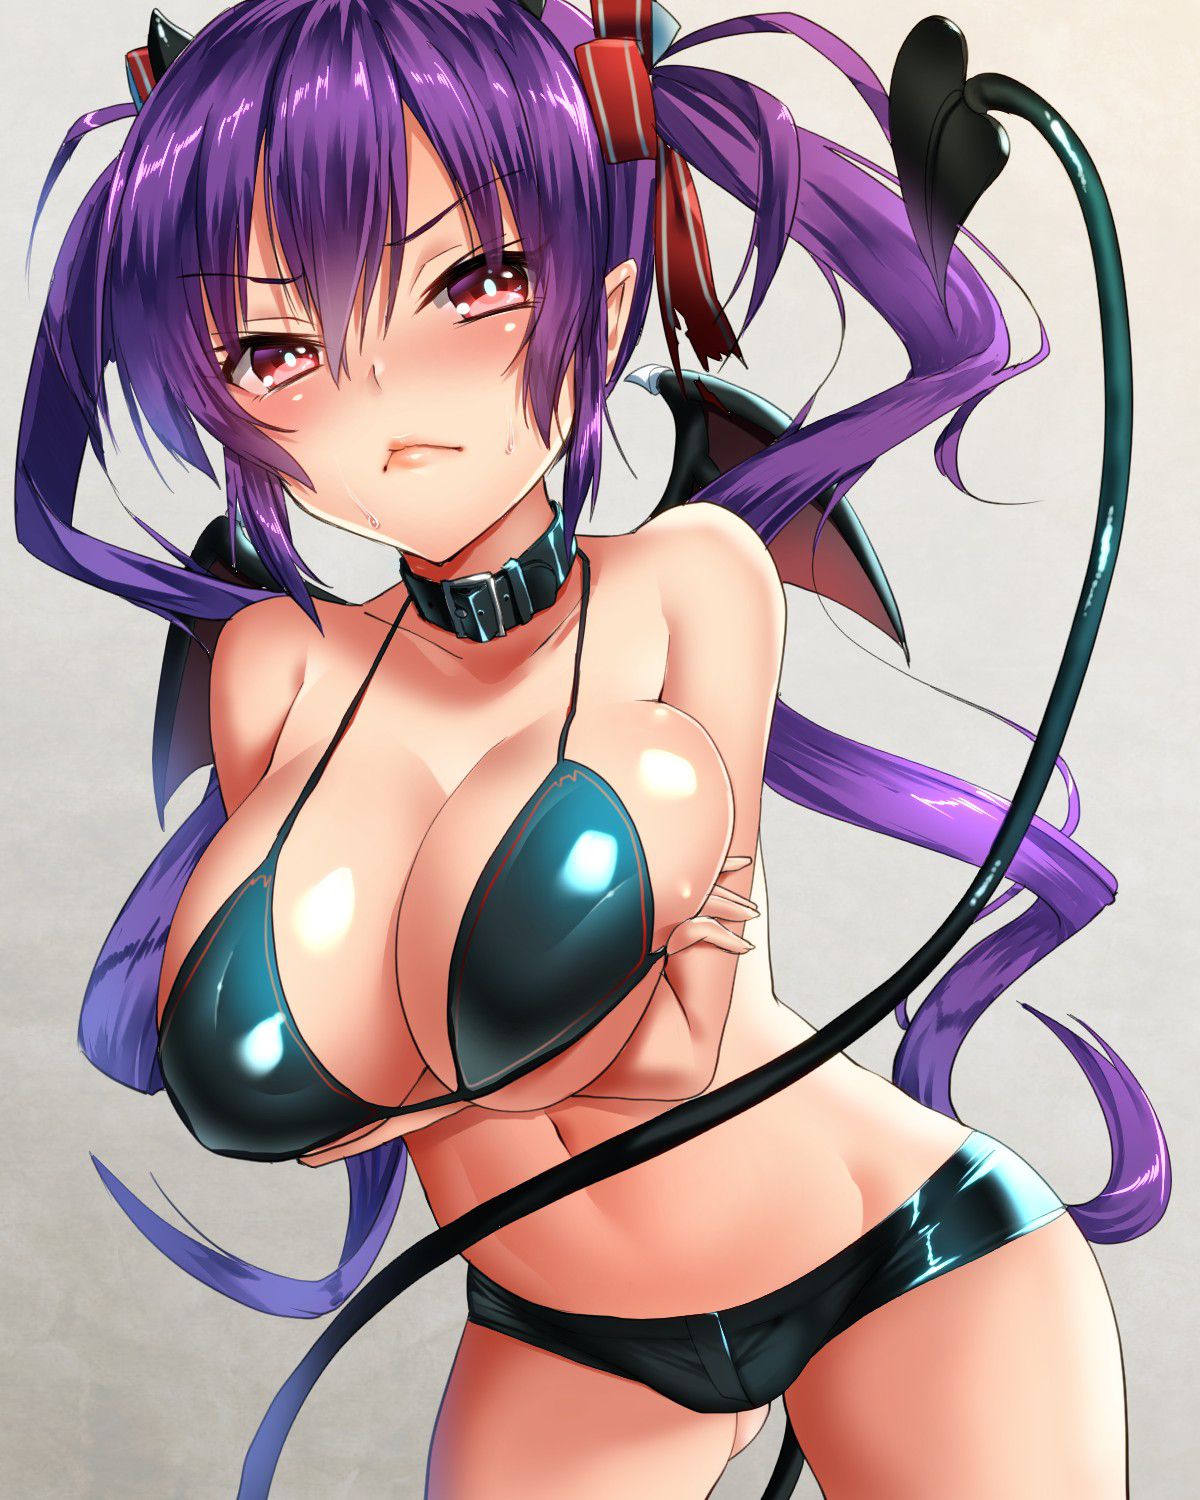 [2nd] Second erotic image of a cute girl twin tails 26 [Twin tails] 27